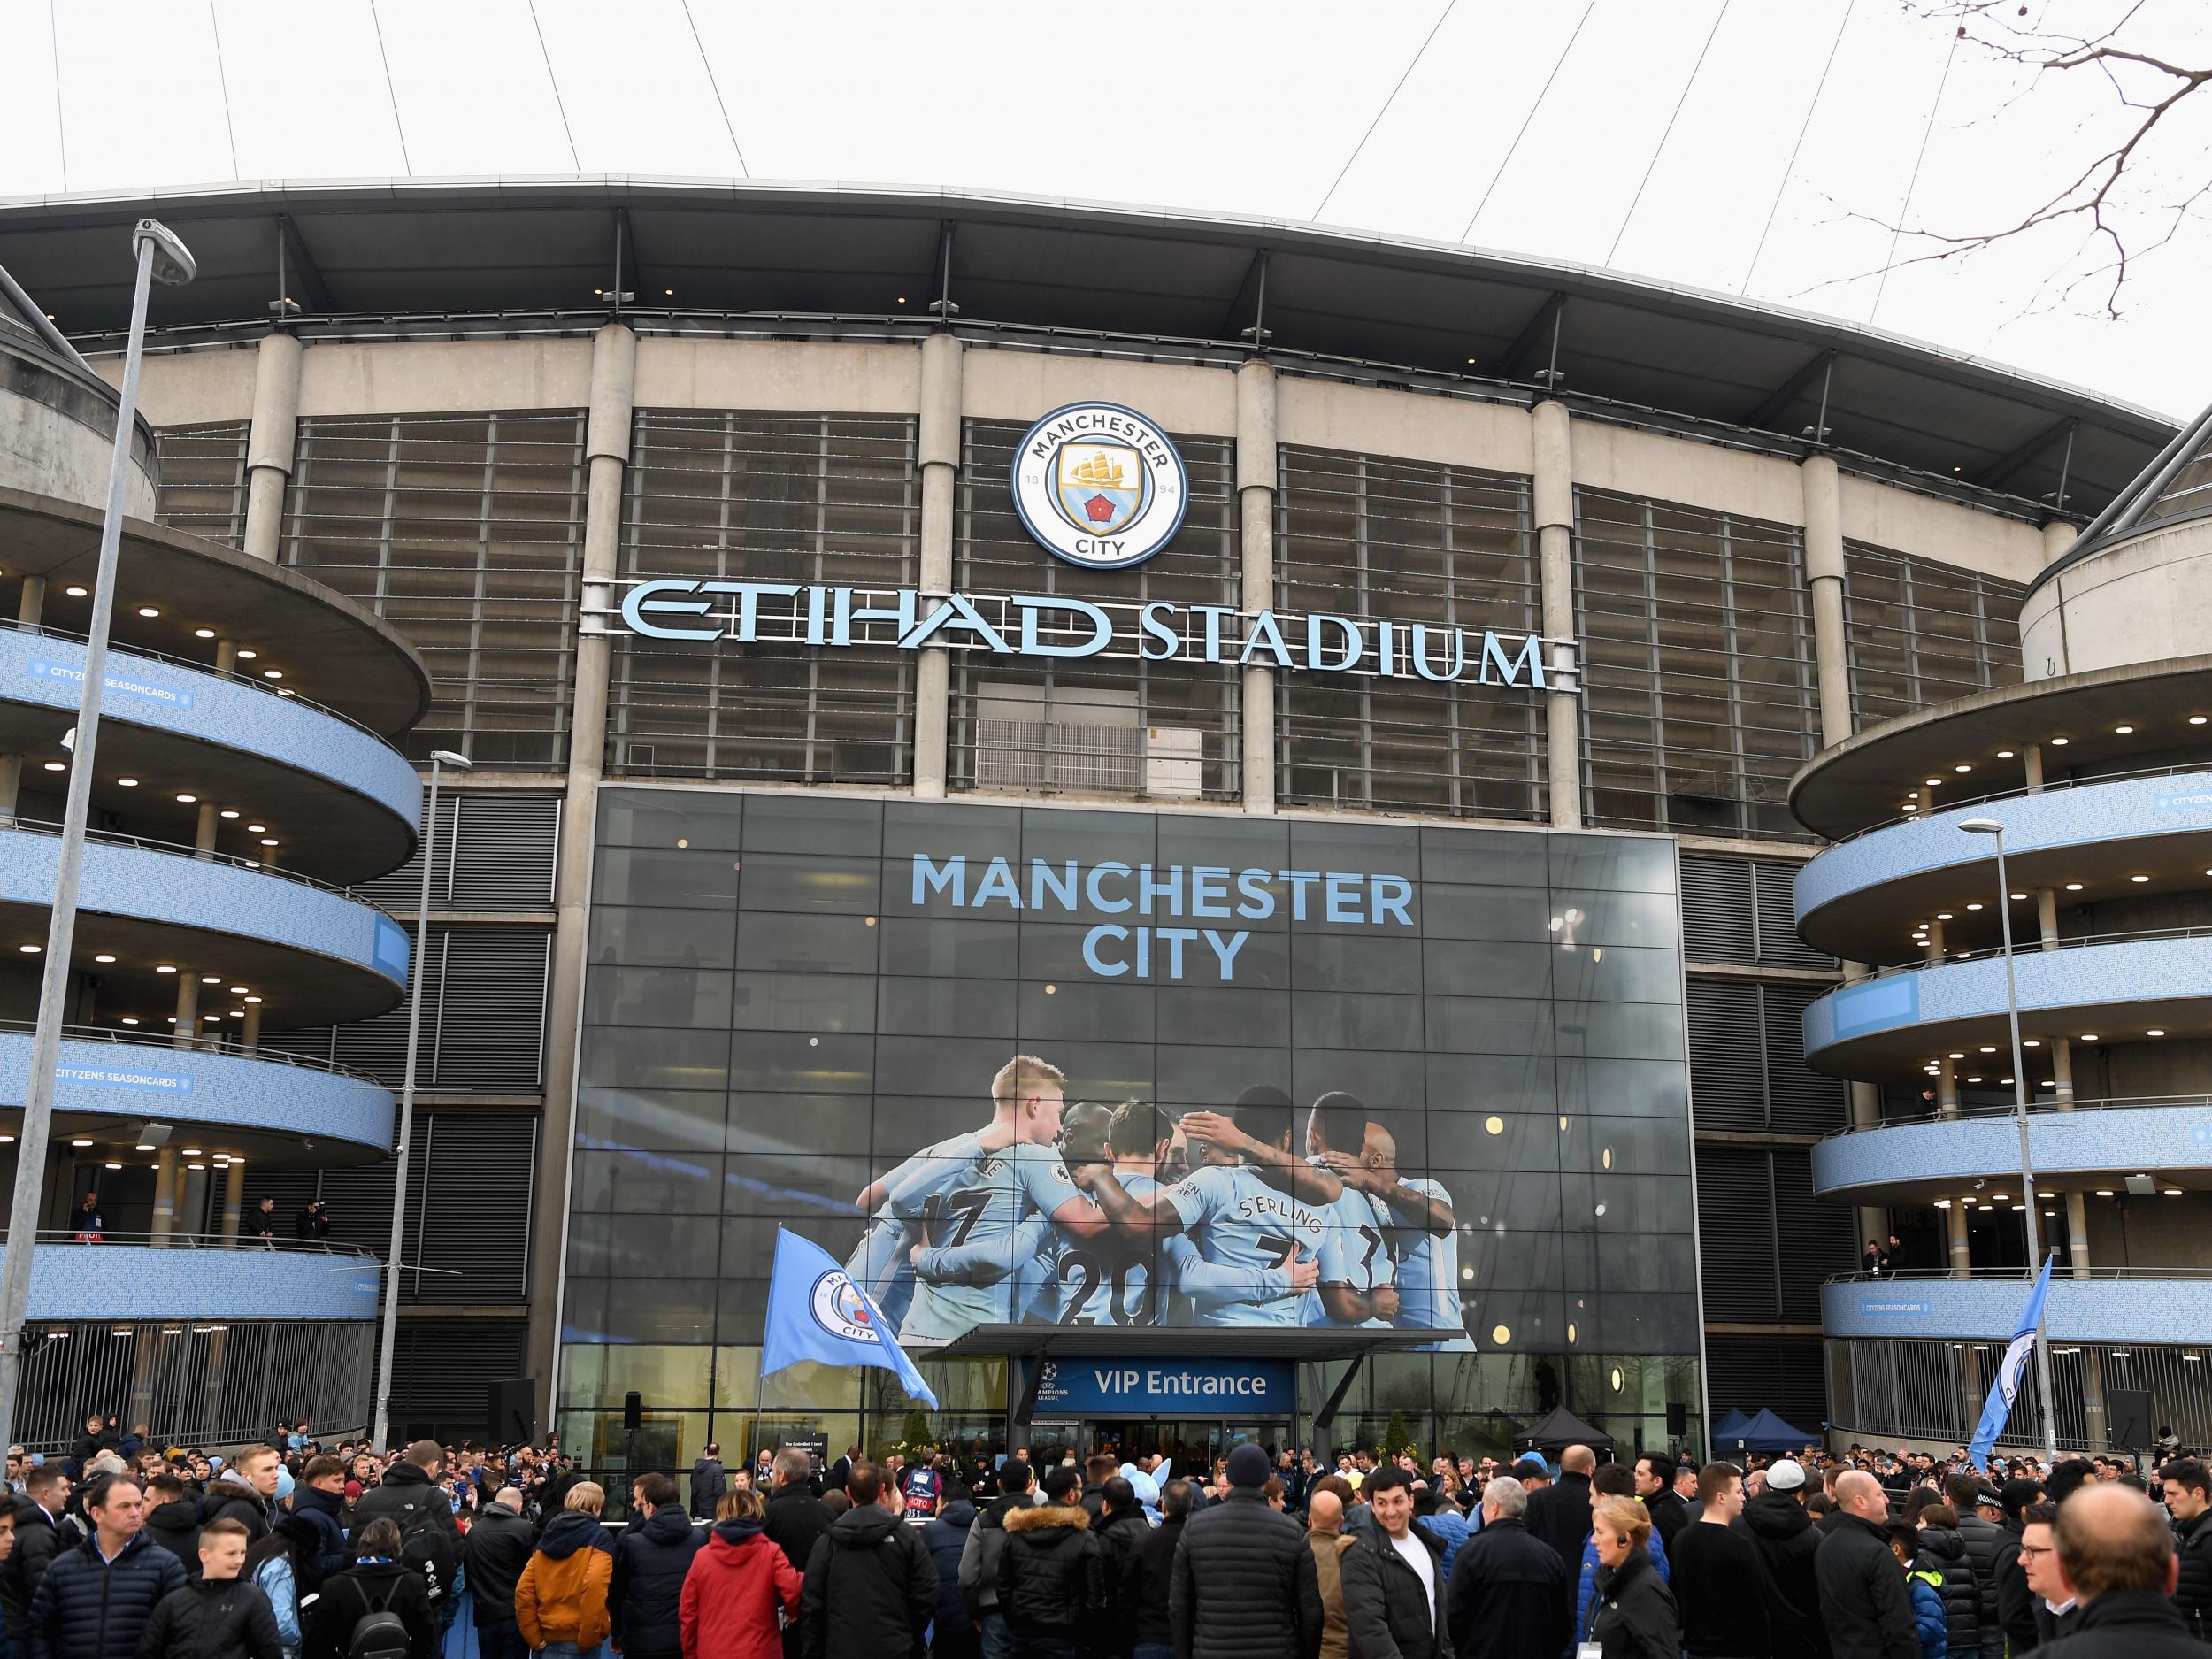 Manchester City defend themselves over allegations of cheating Uefa&apos;s Financial Fair Play rules